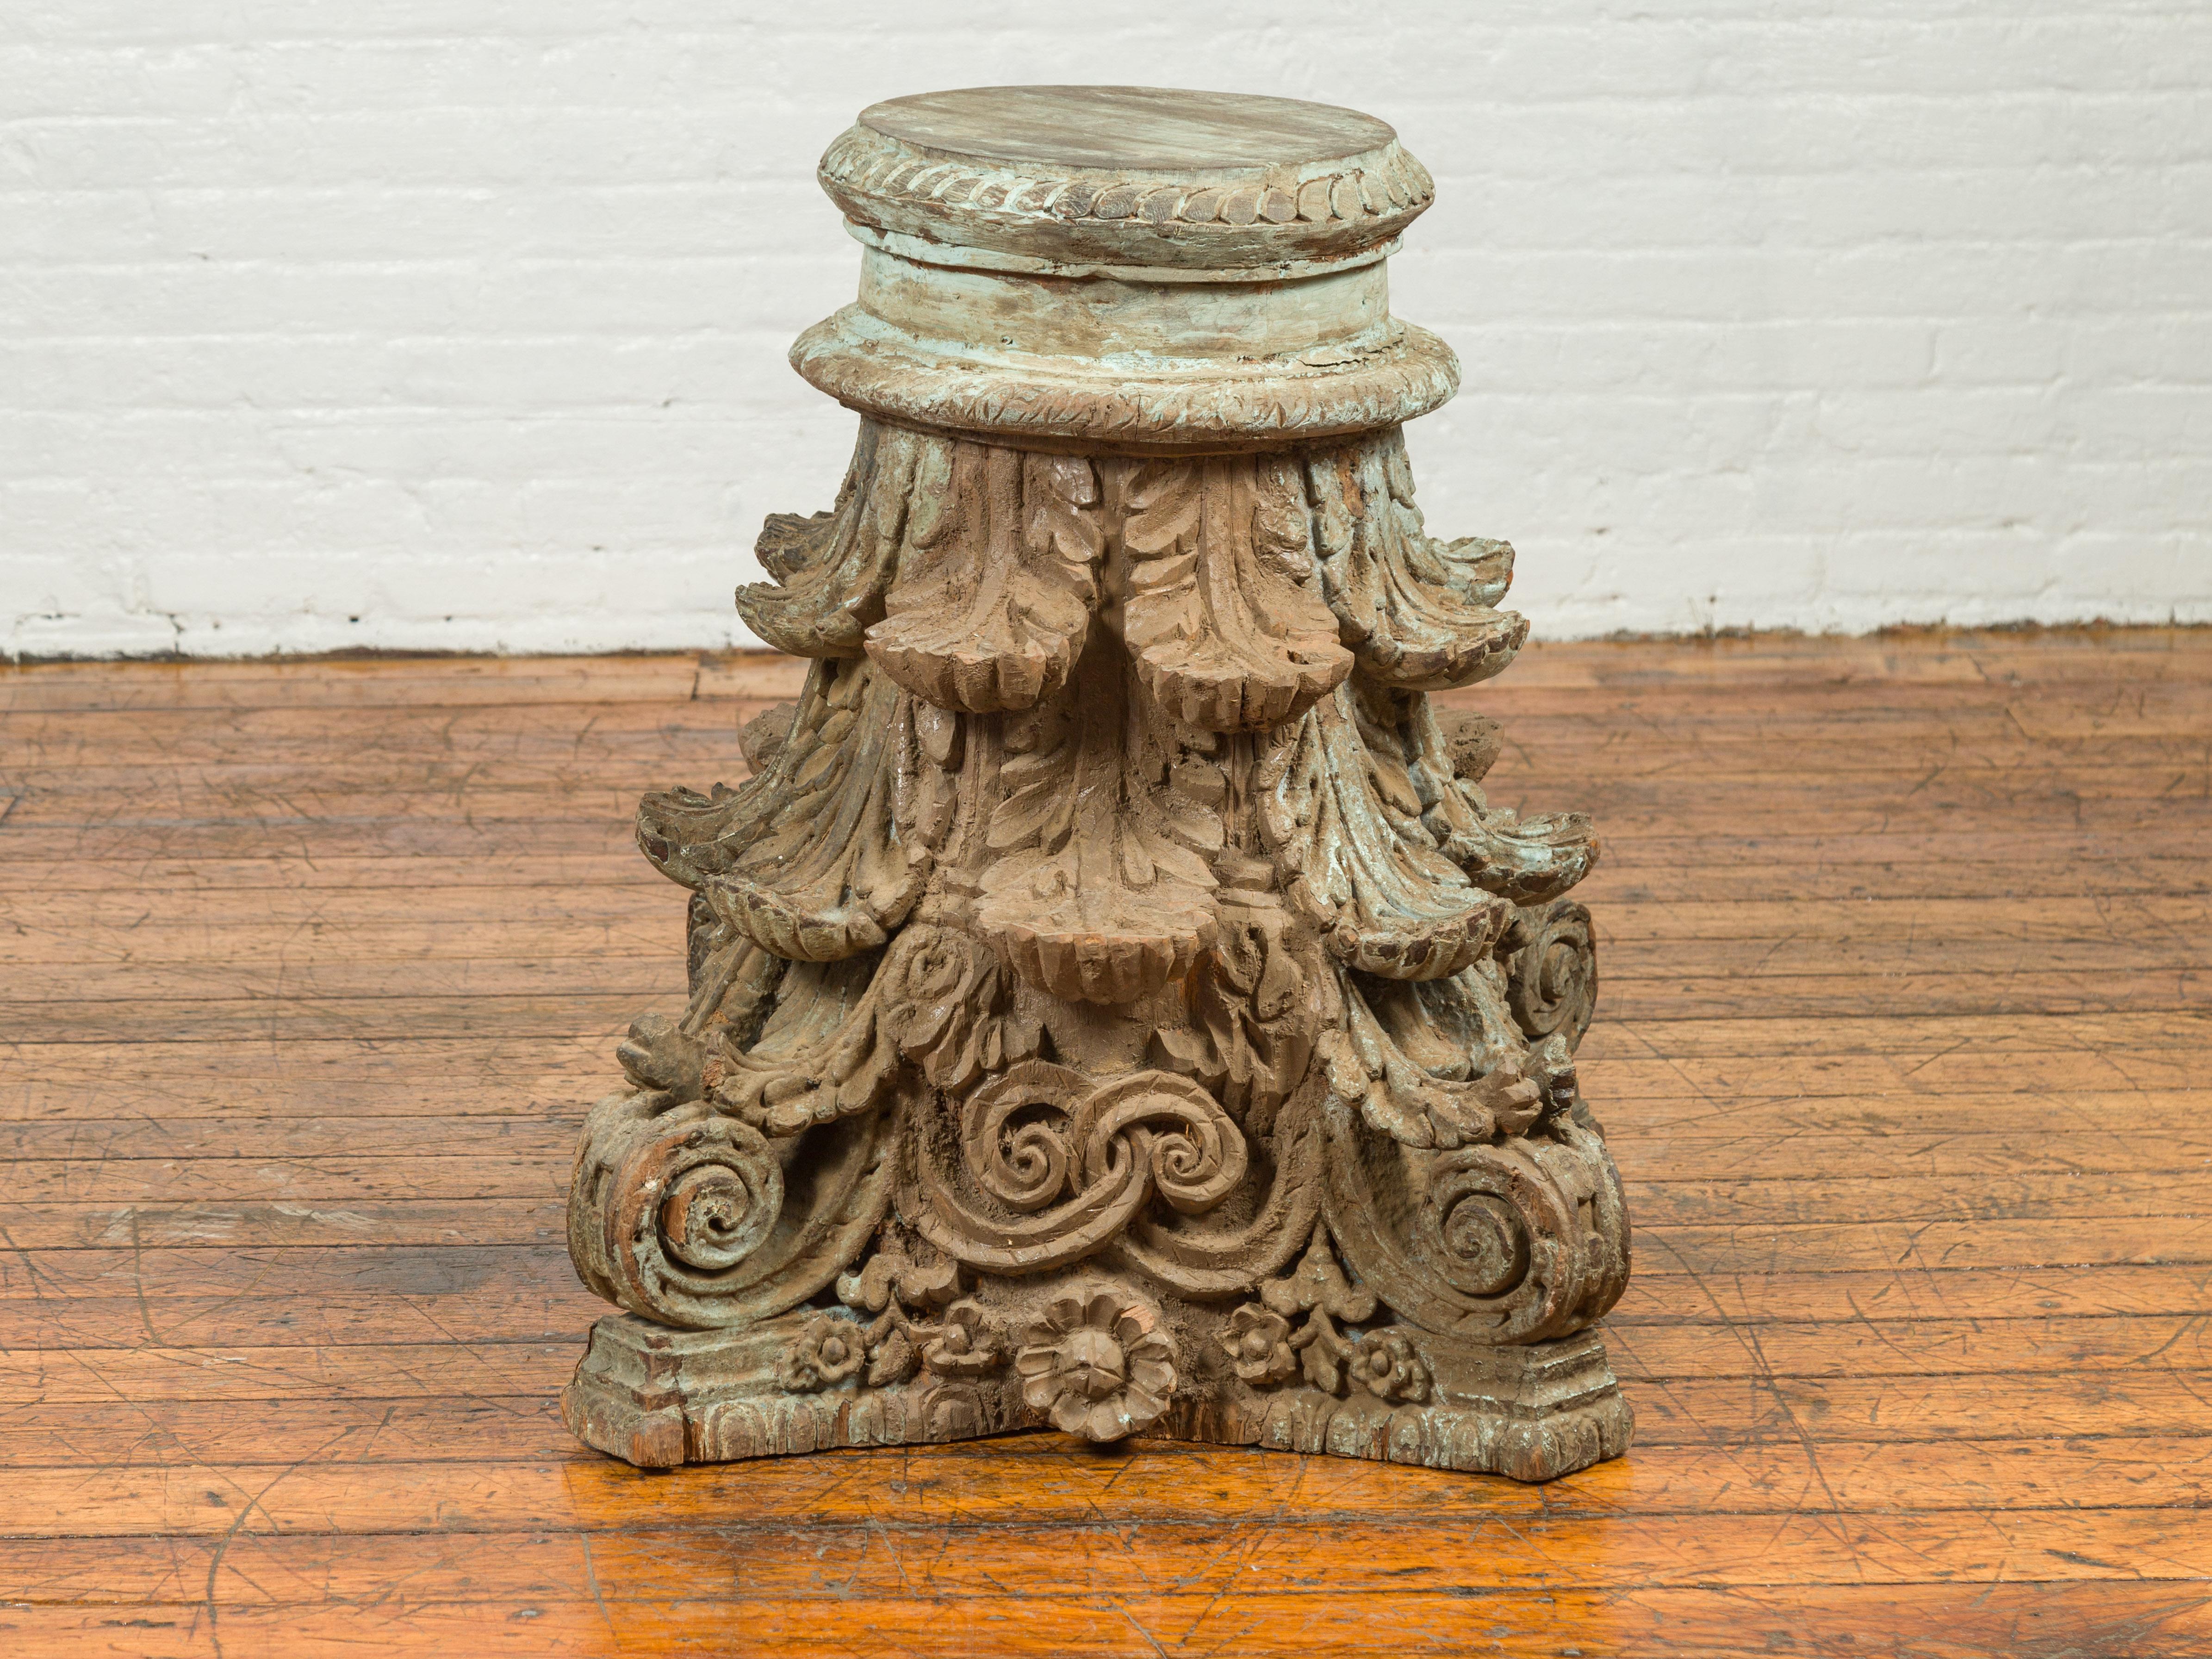 An antique Indian Corinthian temple capital from the 19th century, with distressed patina. Immerse yourself in the rich cultural heritage of Indian architectural history with this 19th century Indian Corinthian temple capital. As a remarkable piece